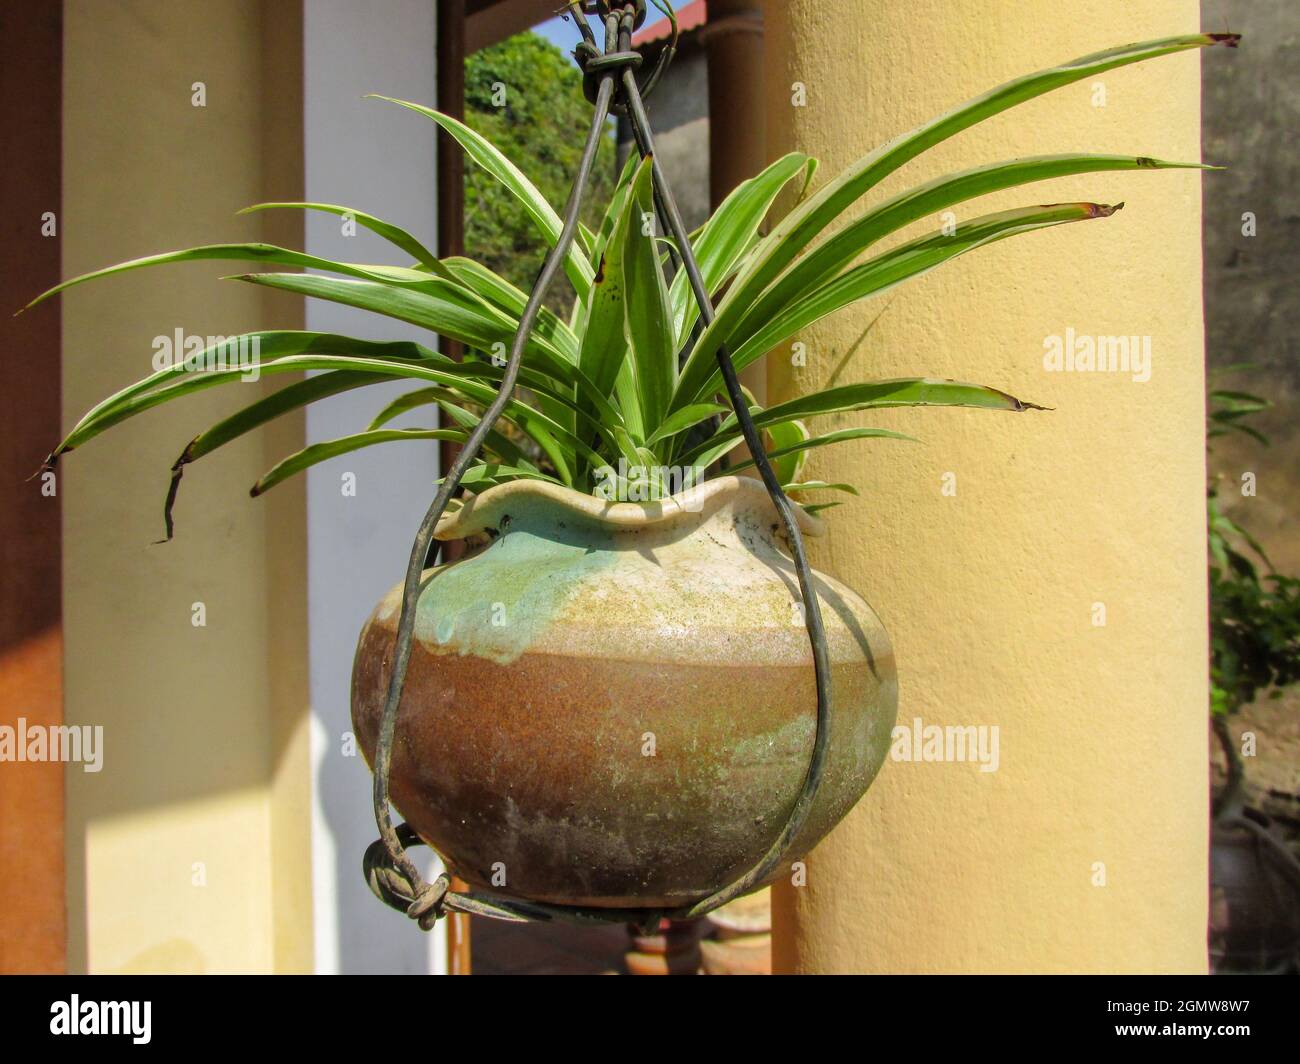 A Spider Plant or Chlorophytum bichetii Karrer Backer plant is growing and hanging in brown pot in the garden Stock Photo